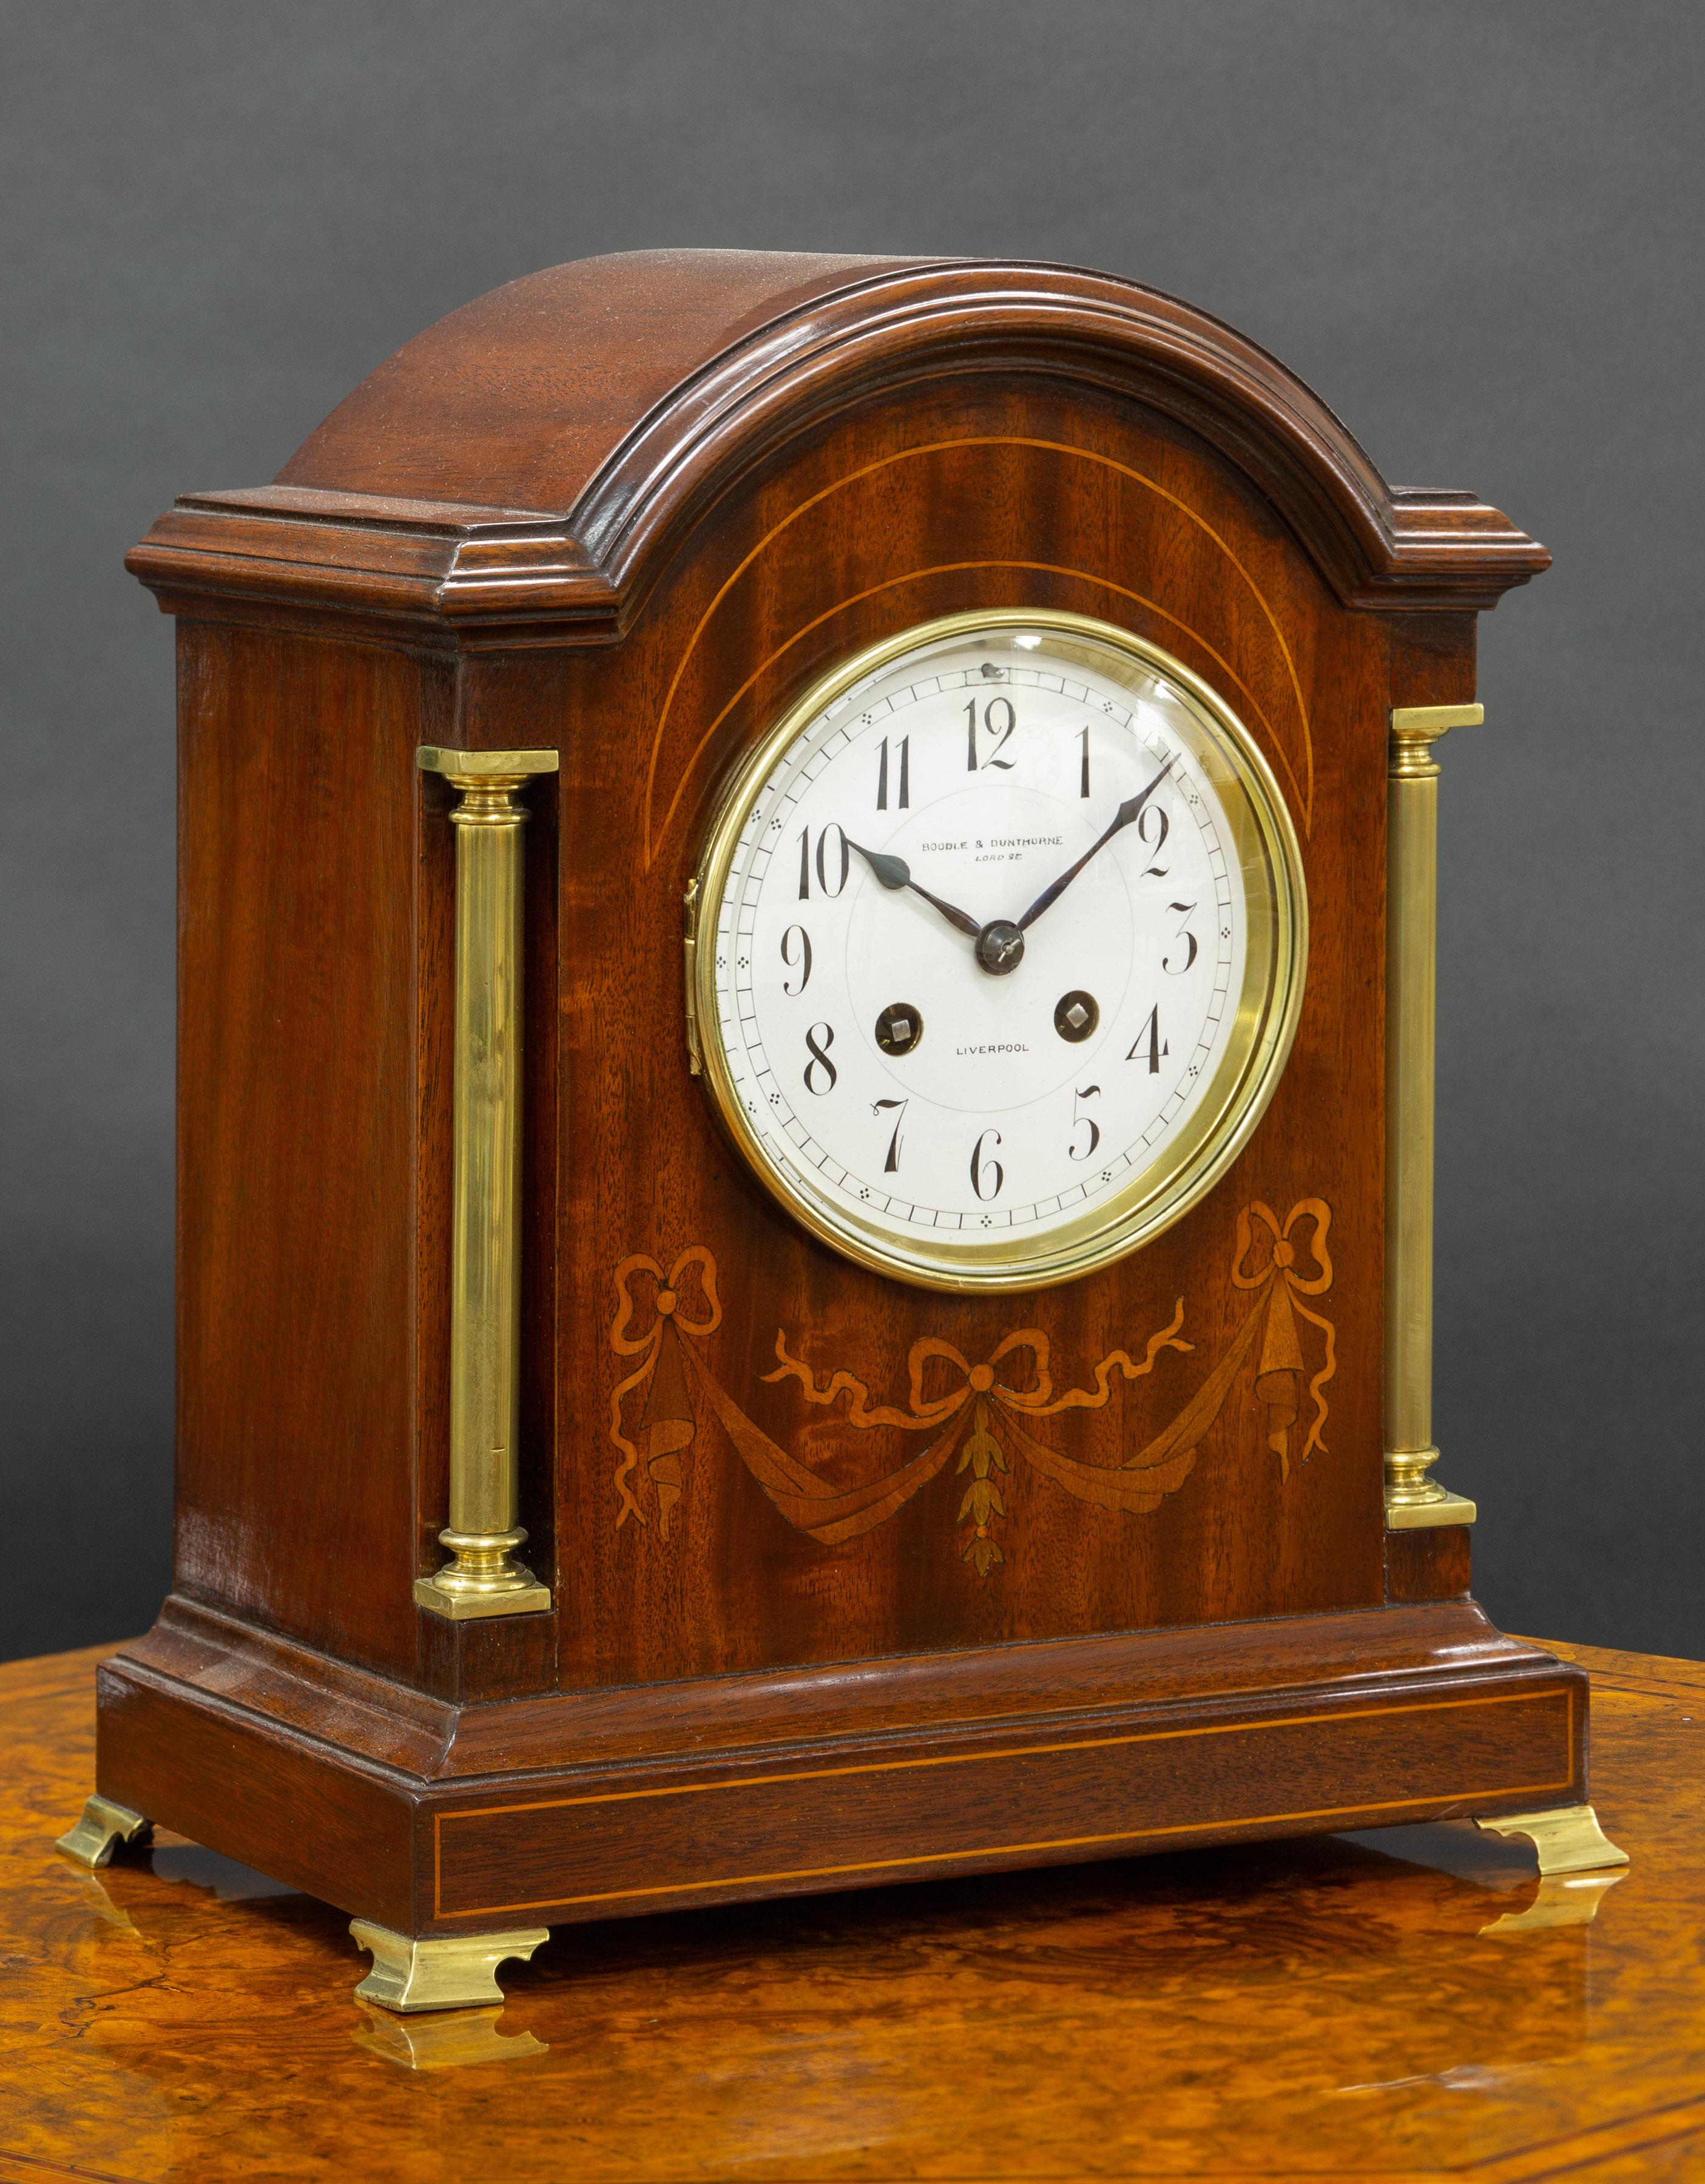 Edwardian Mantel clock in a mahogany case with brass pillars and satinwood floral and line inlaid decoration, standing on brass outswept bracket feet. 

Enamel dial with Arabic numerals, original ‘blued’ steel hands signed ‘Boodle and Dunthorne.